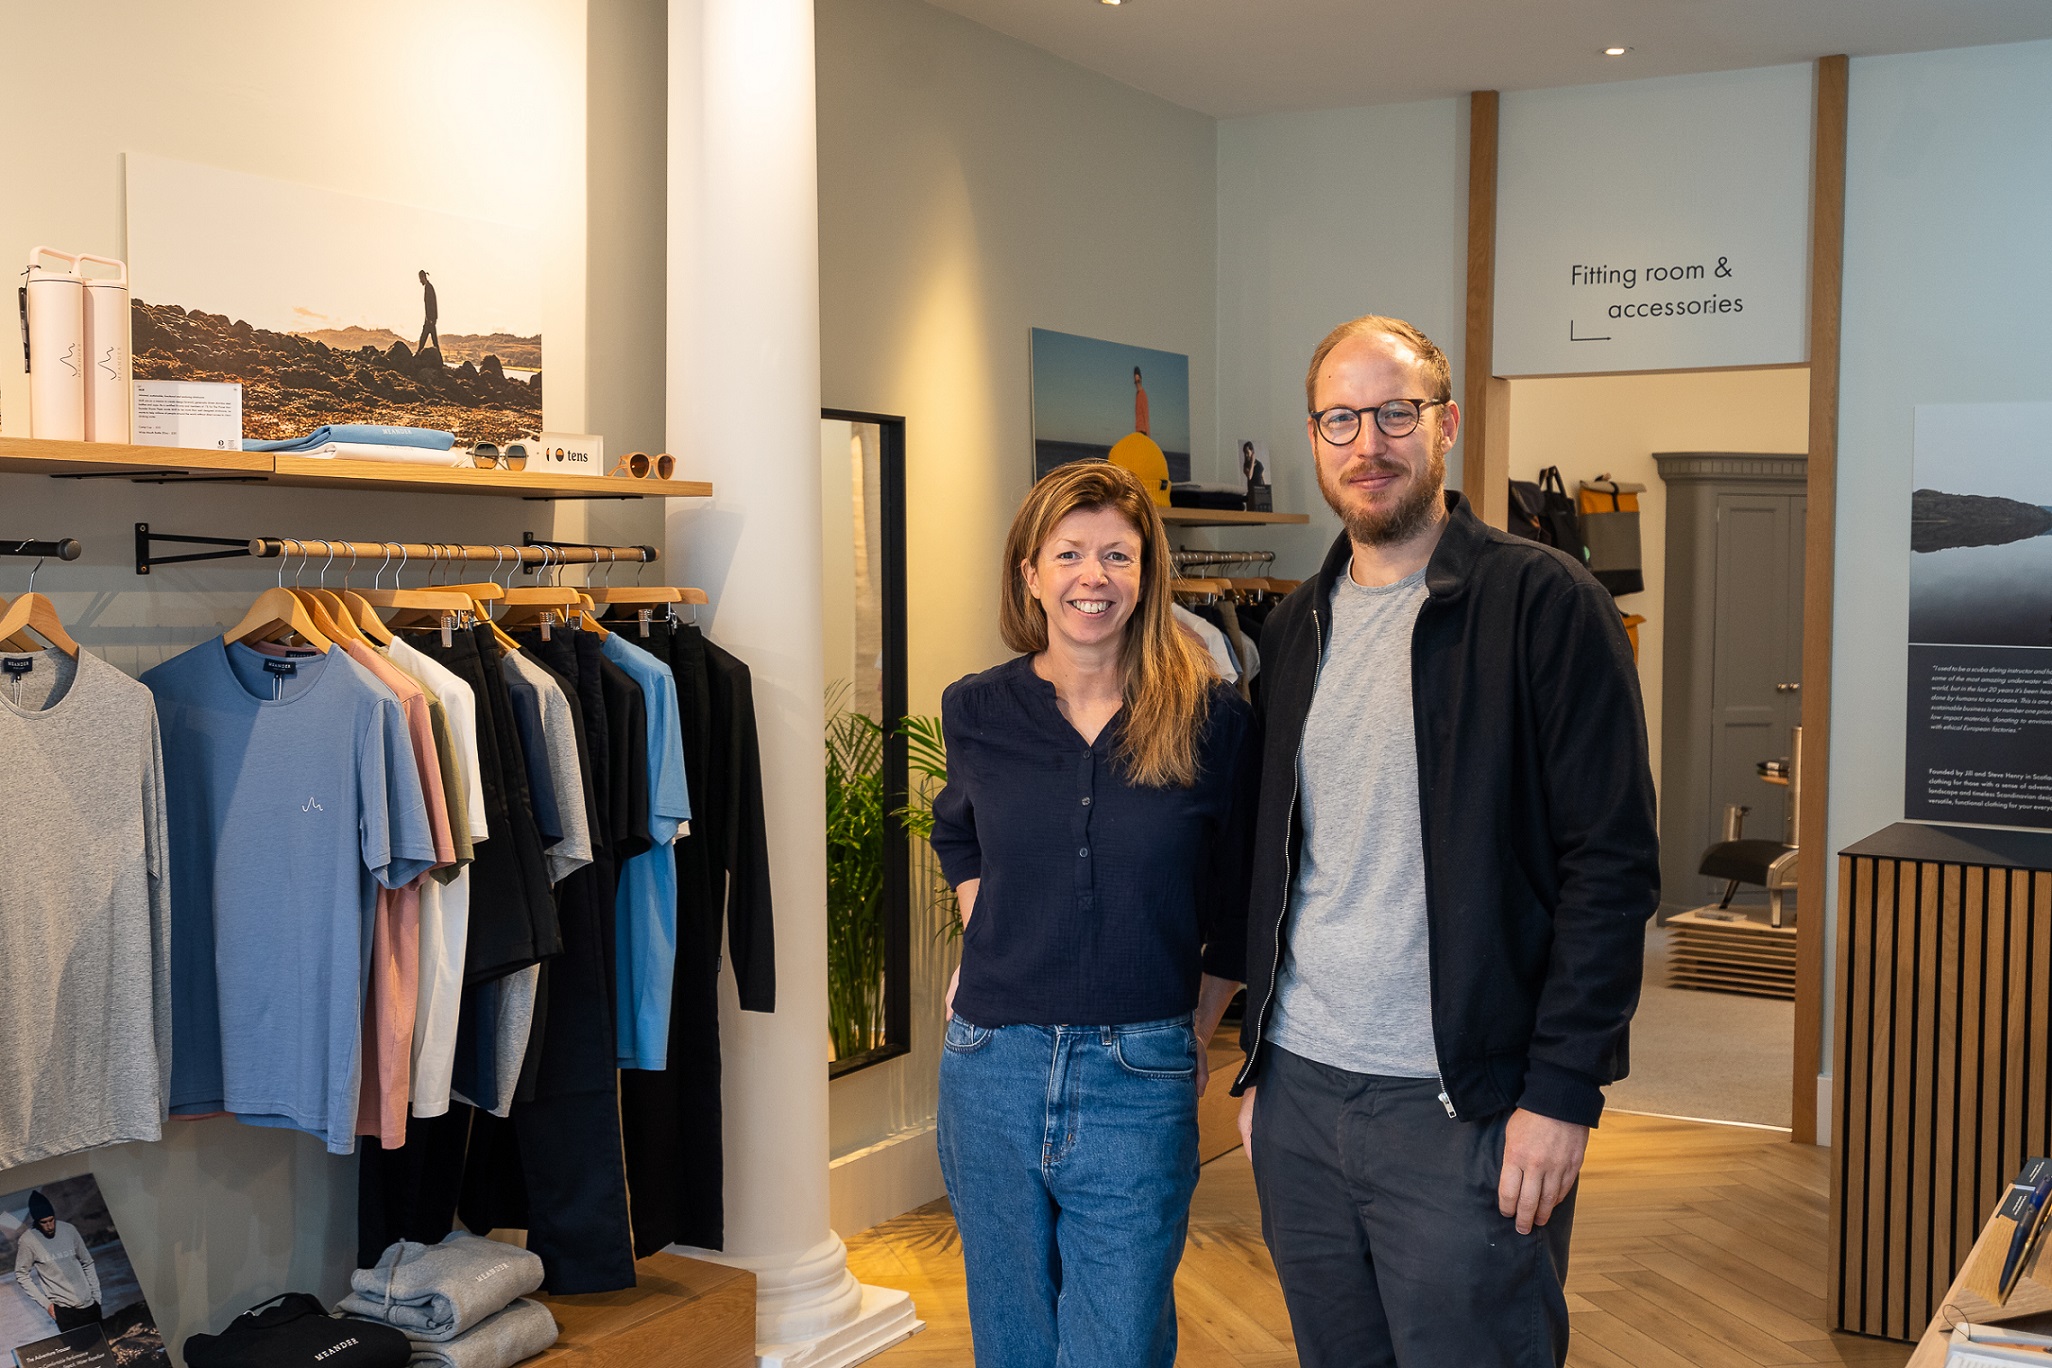 Green is the new black as sustainable clothing retailer eyes expansion ...